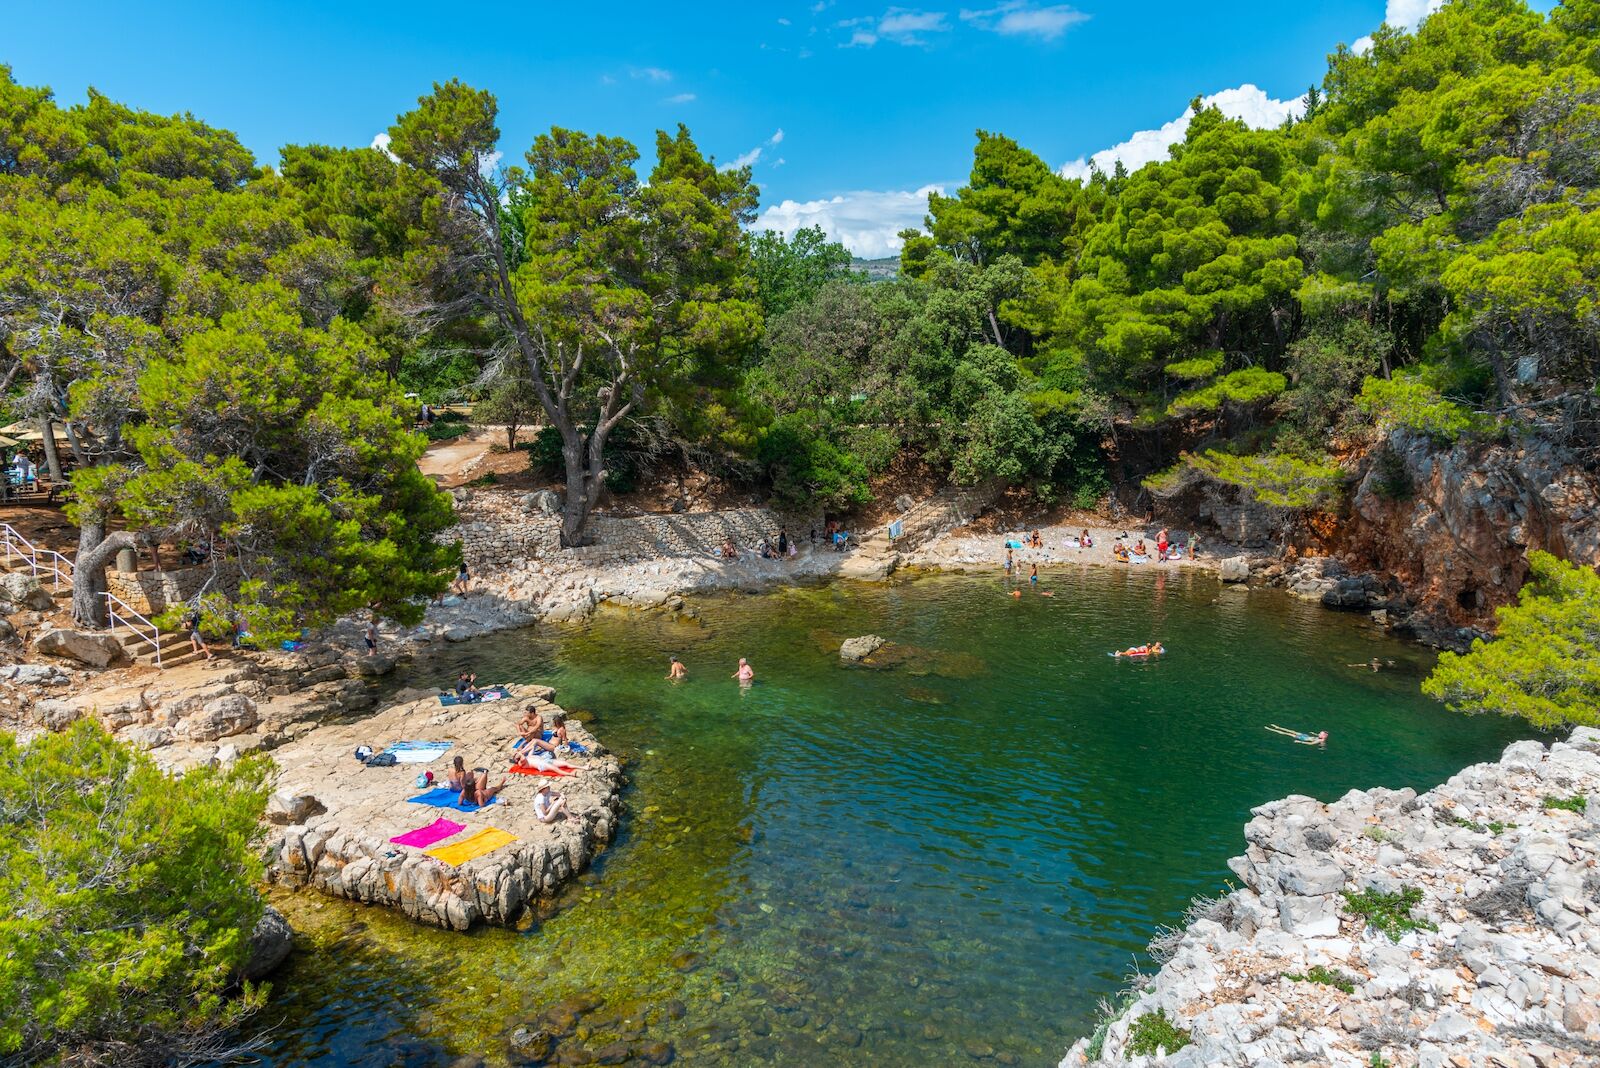 The lake at Lokrum island, where people take day trips from Dubrovnik, to swim and sunbathe